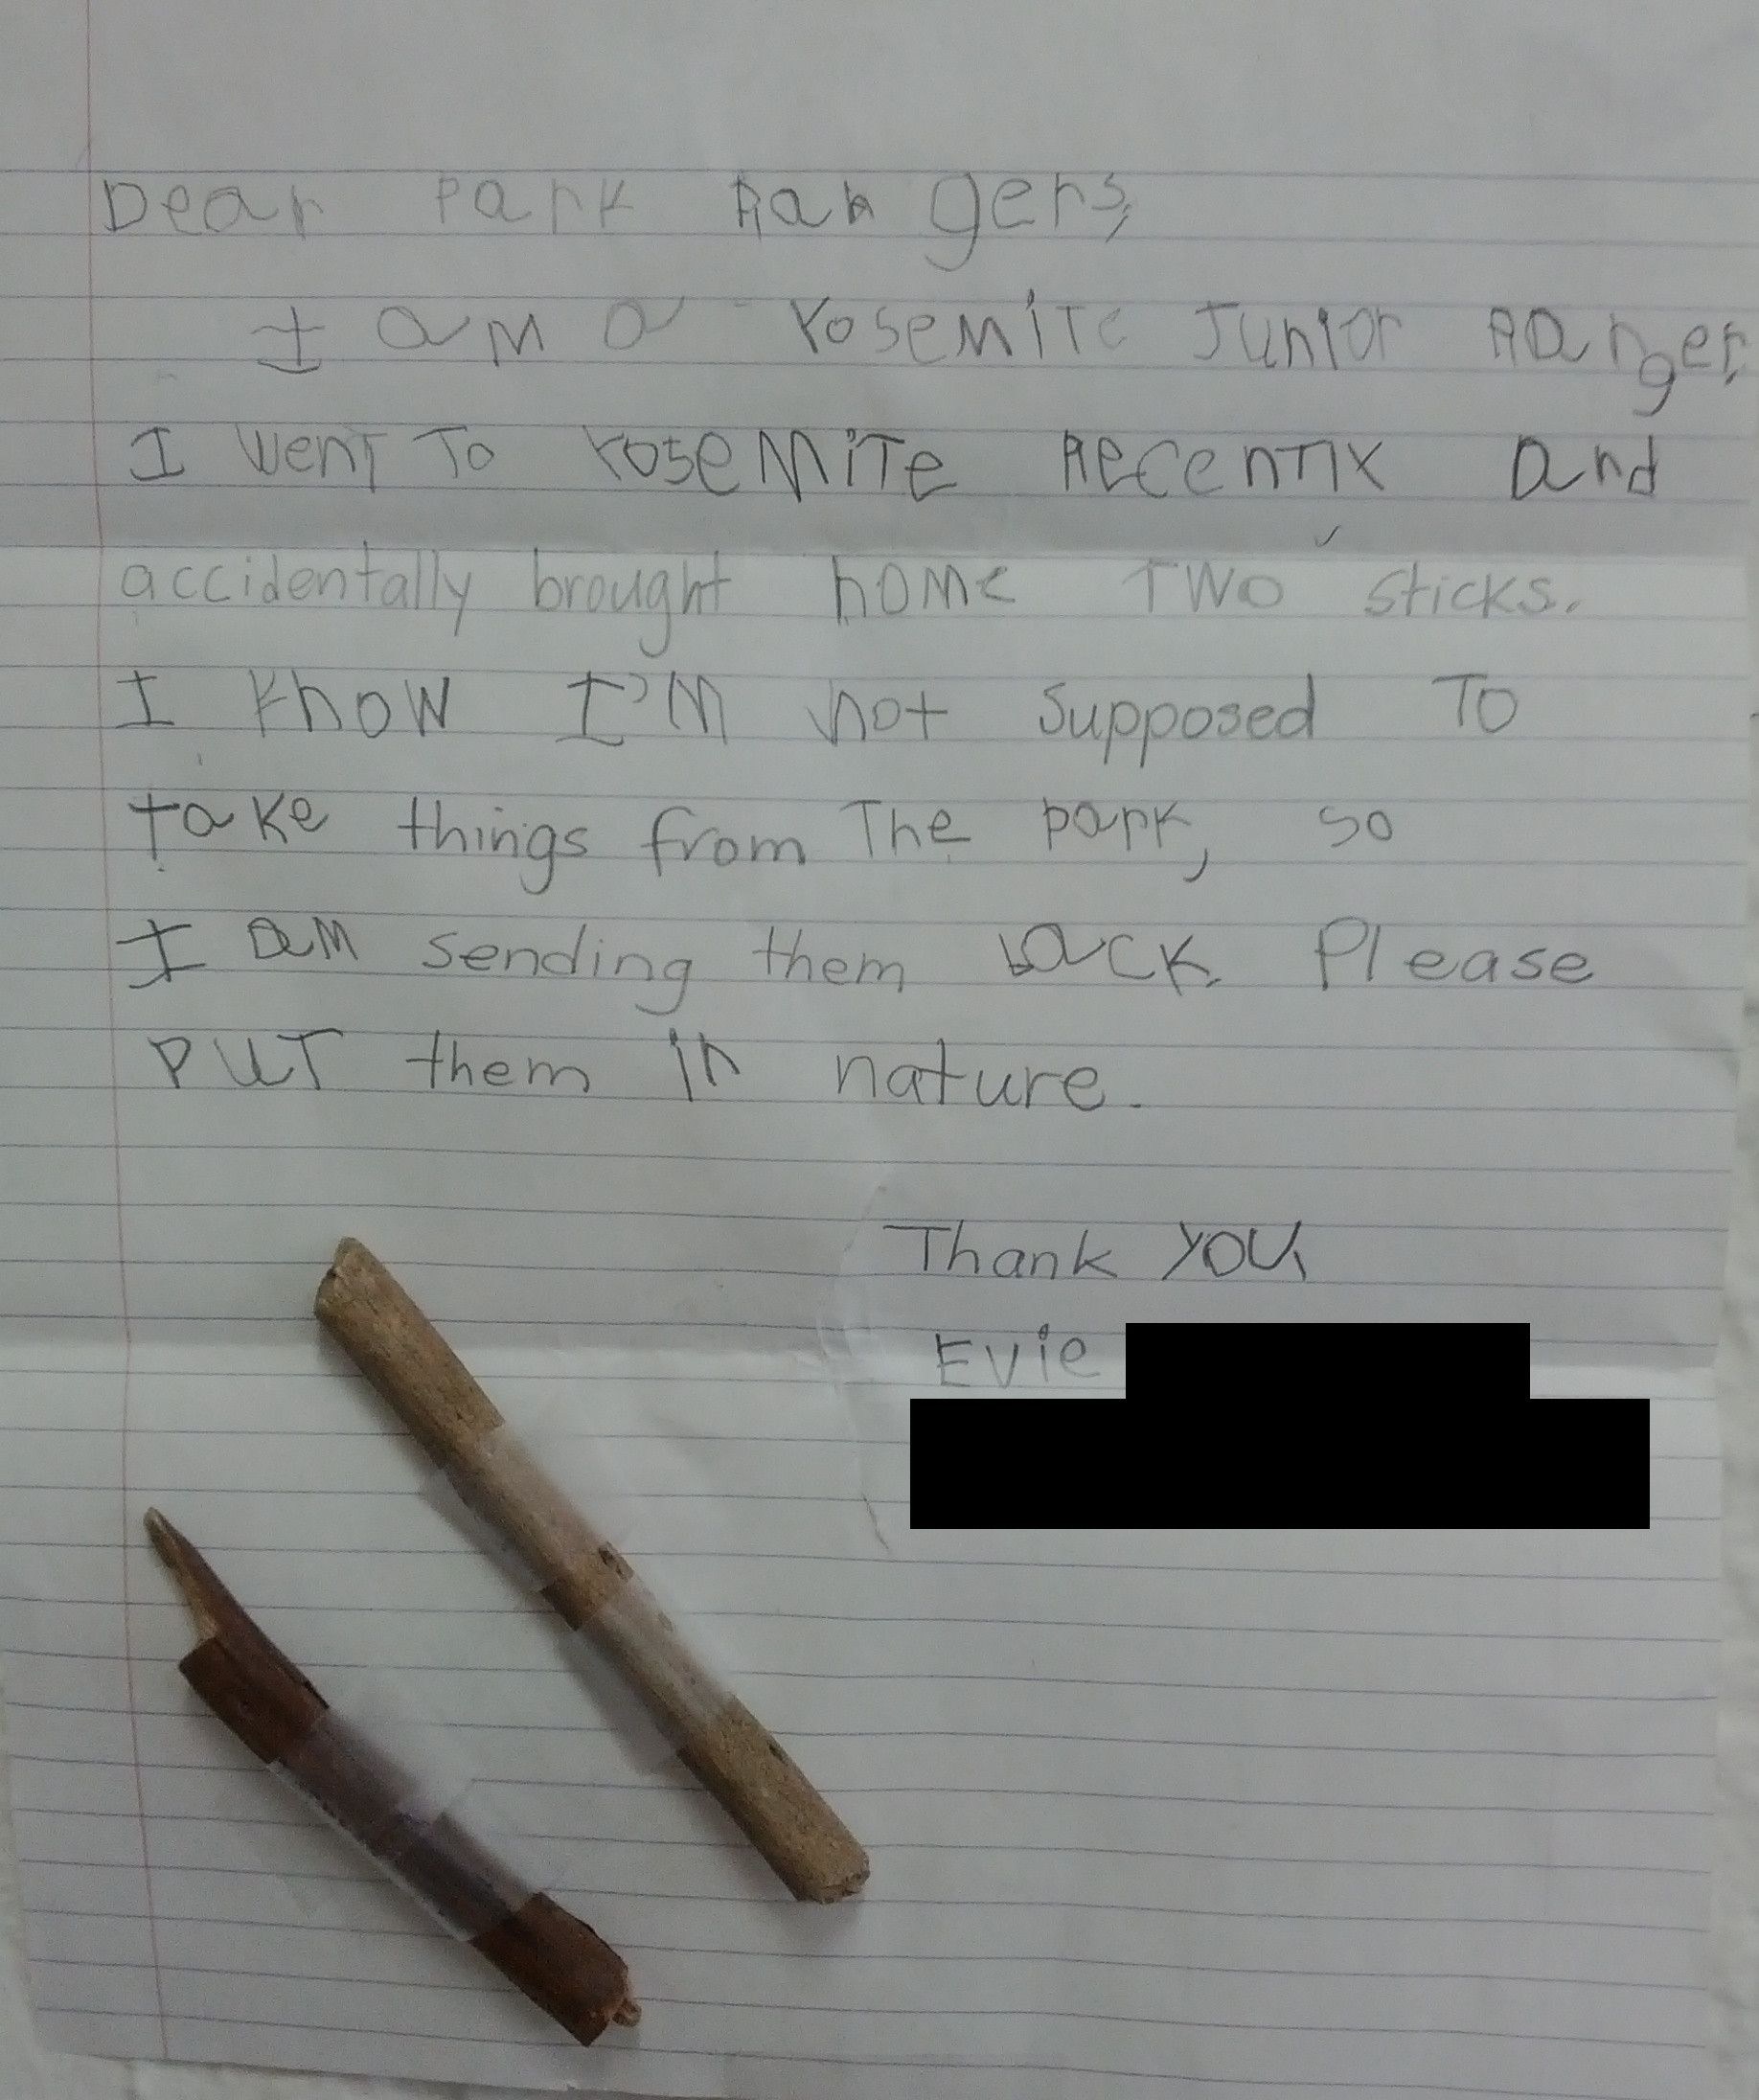 Little Evie realized she left Yosemite with some contraband - two sticks - so she mailed them back with the cutest letter ever penned by a visitor.